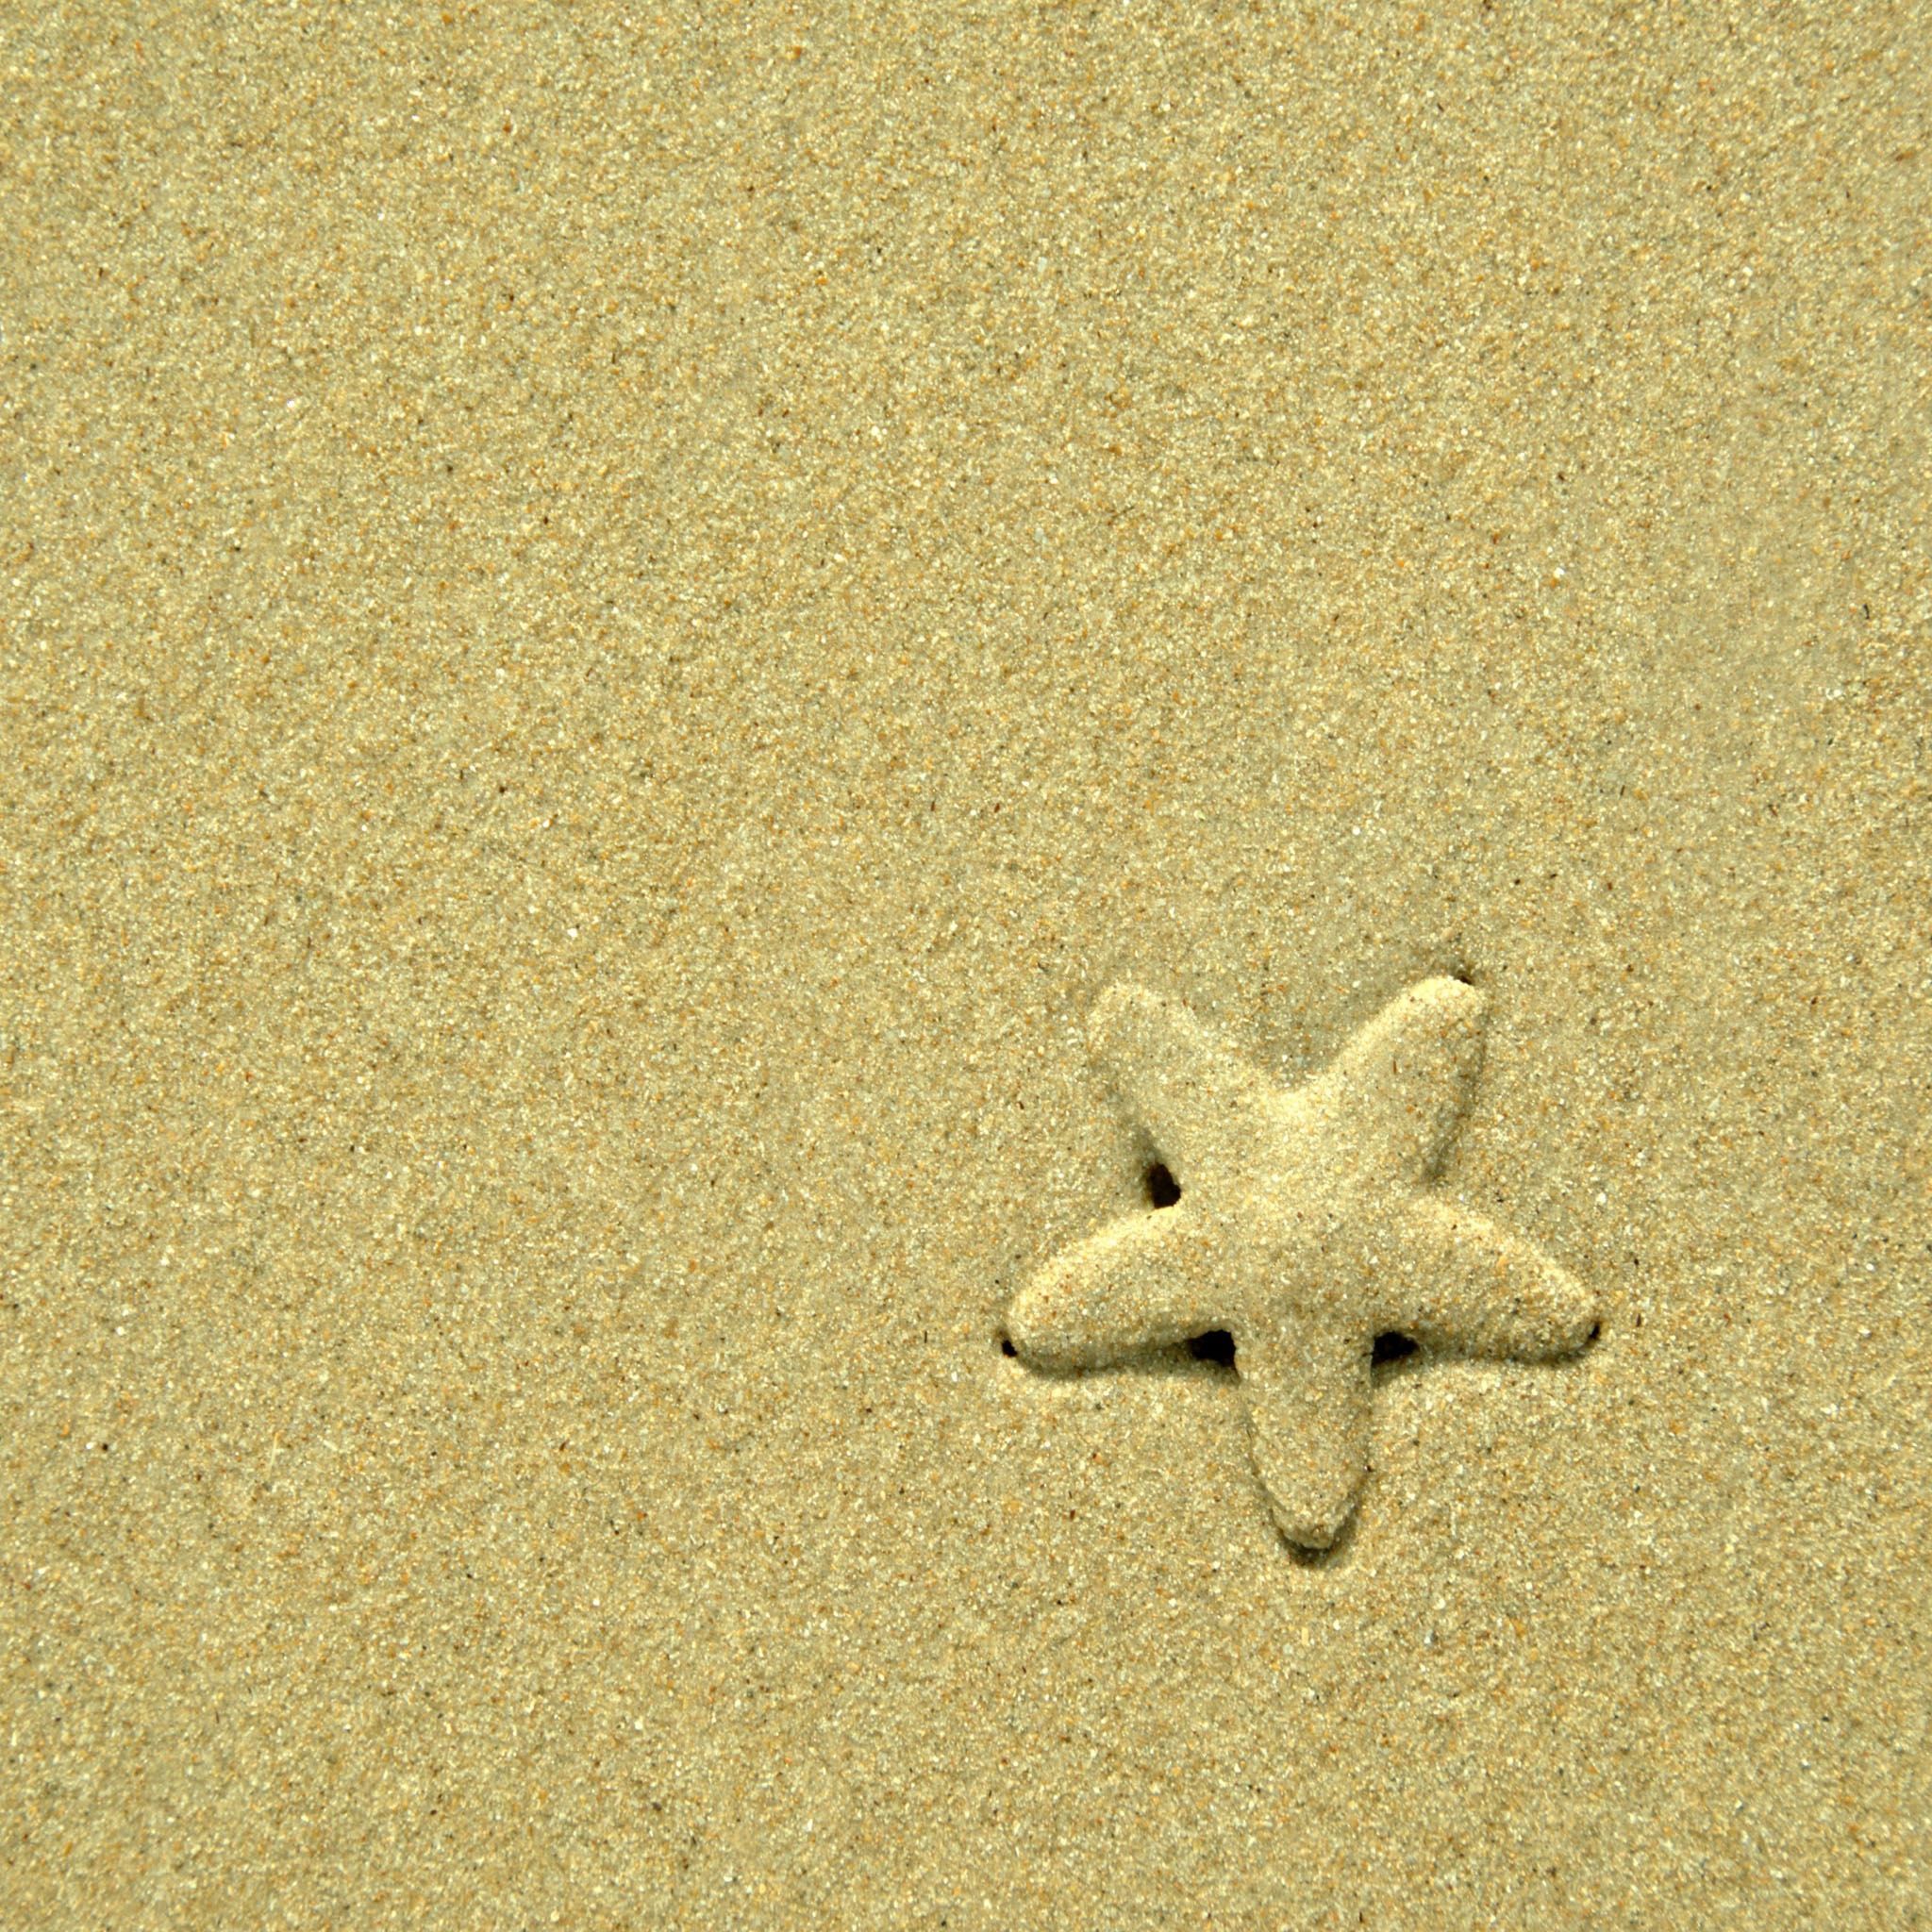 A starfish is in the sand on top of some grass - Starfish